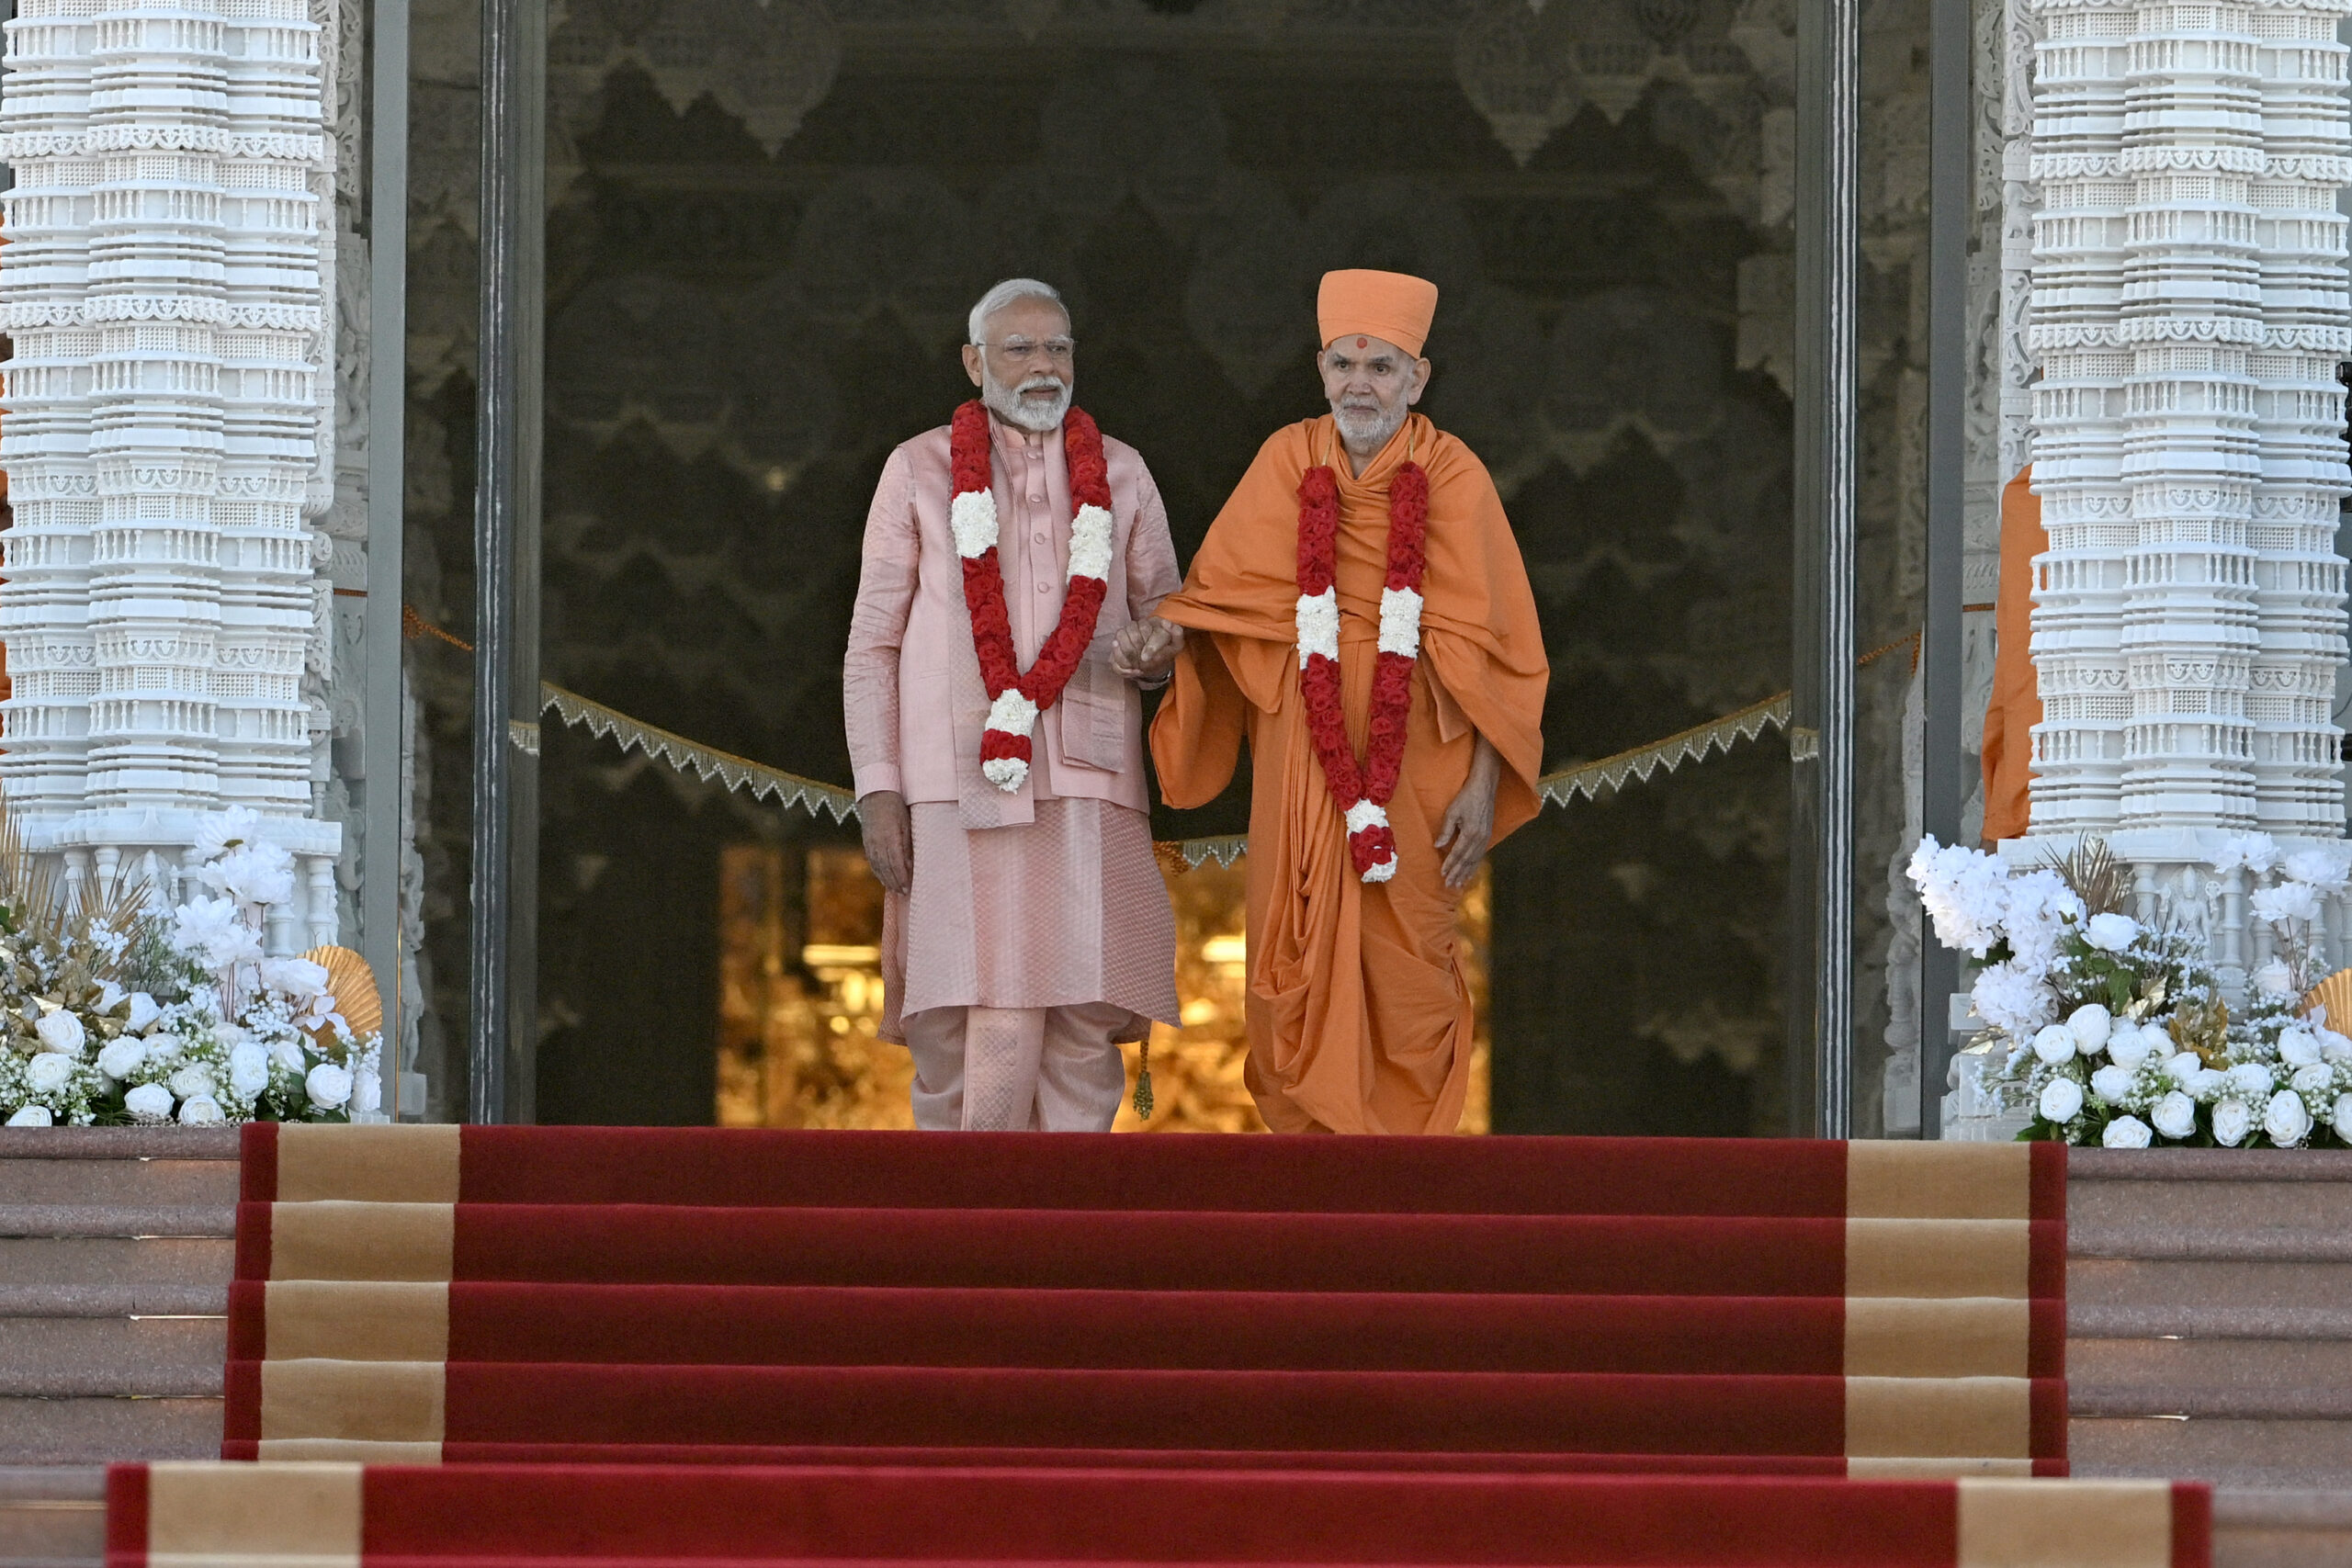 Abu Dhabi Hindu temple sees 350,000 footfall in just one month of inauguration